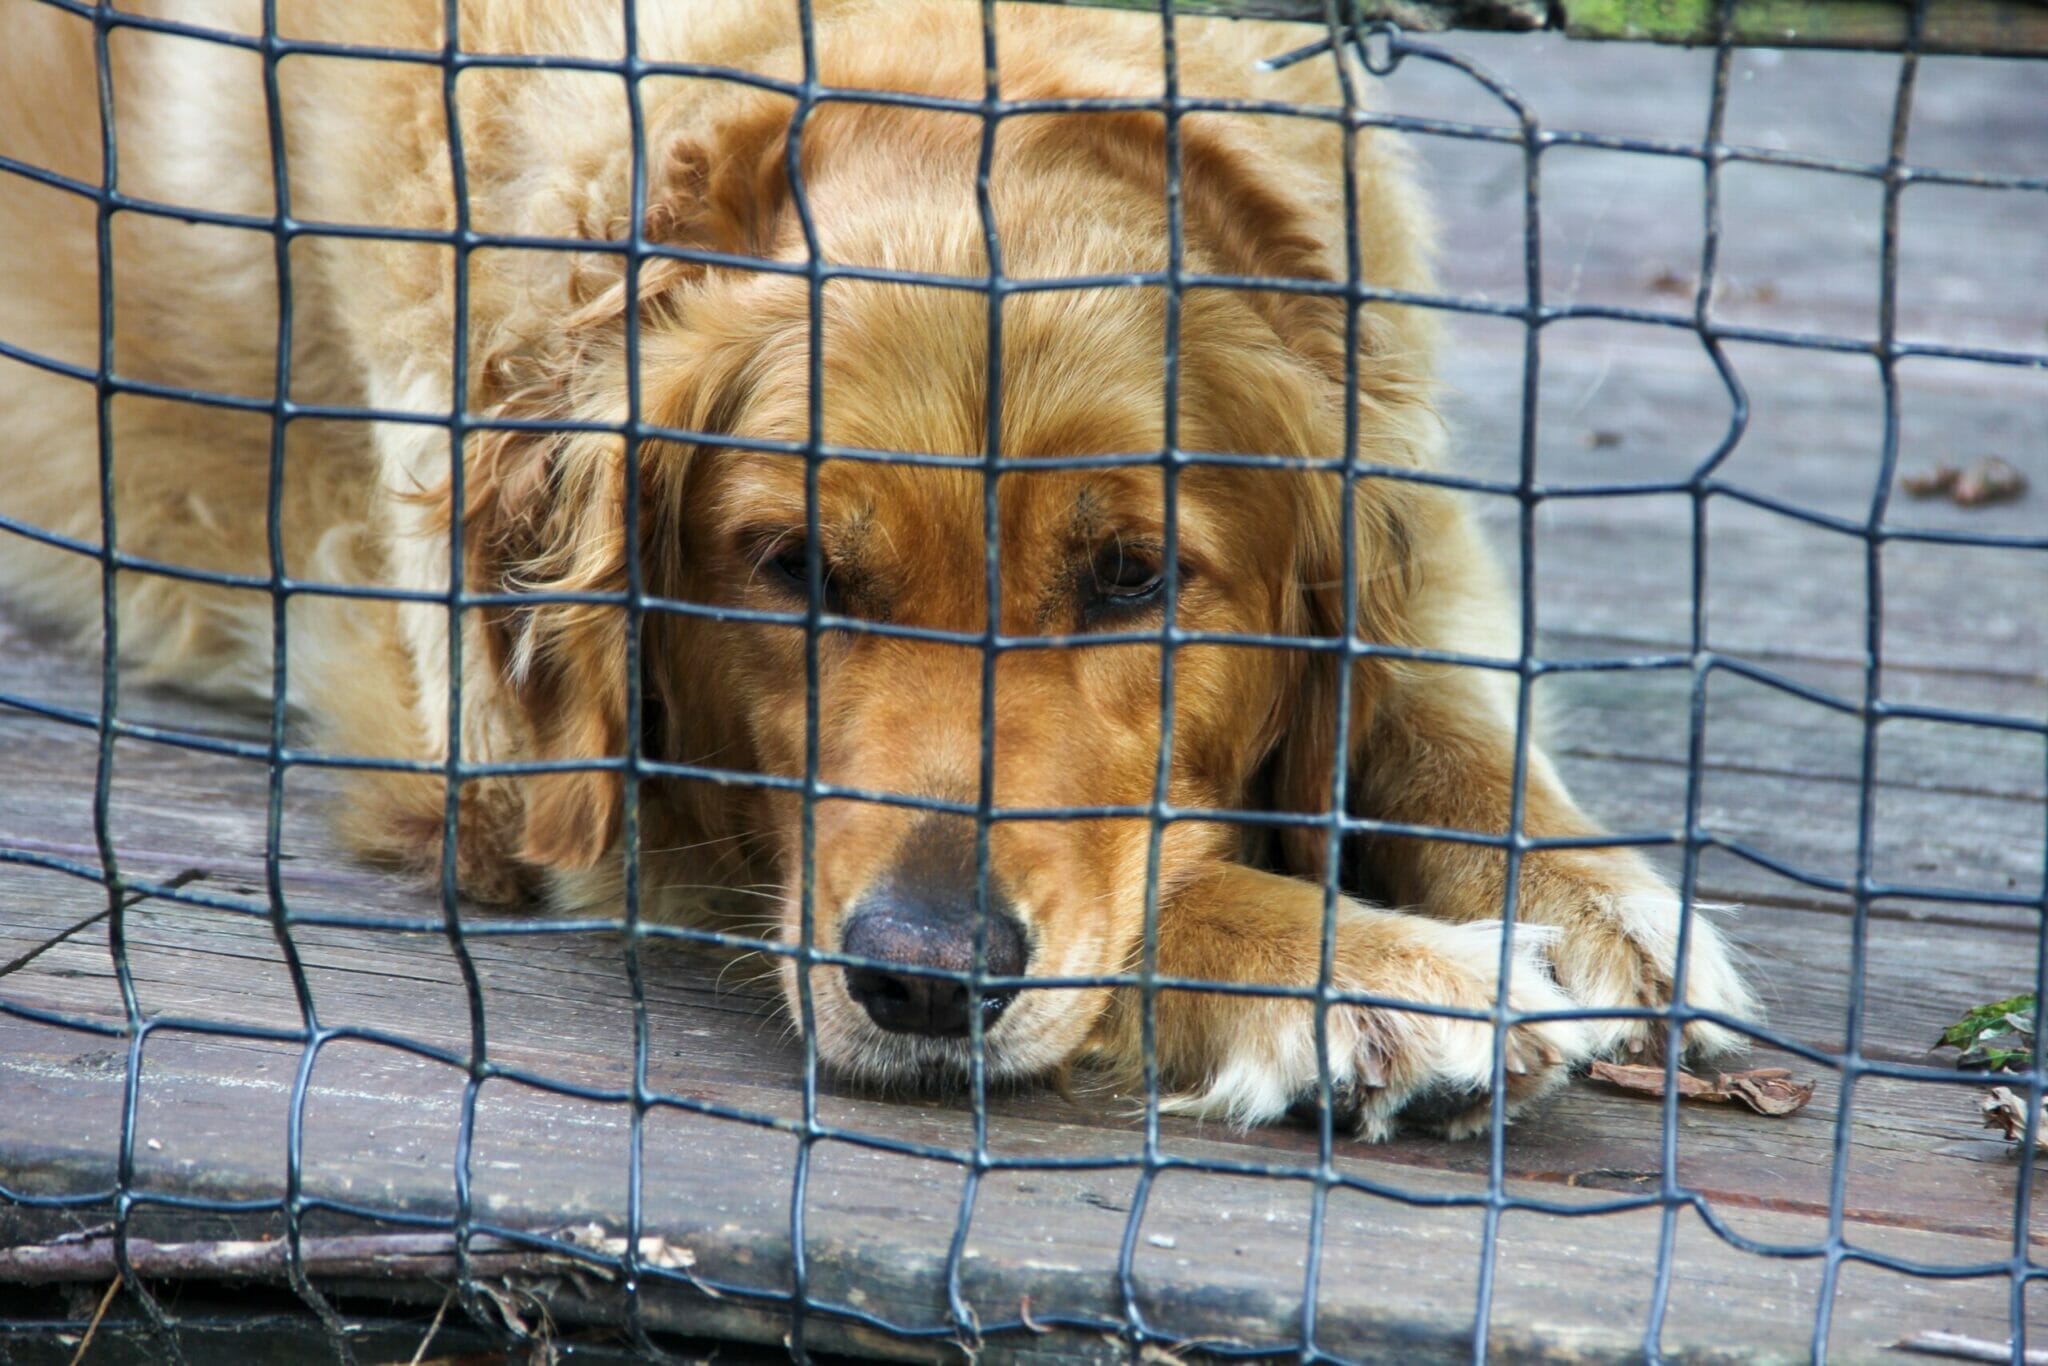 Why does an adopted dog seem depressed and sad?